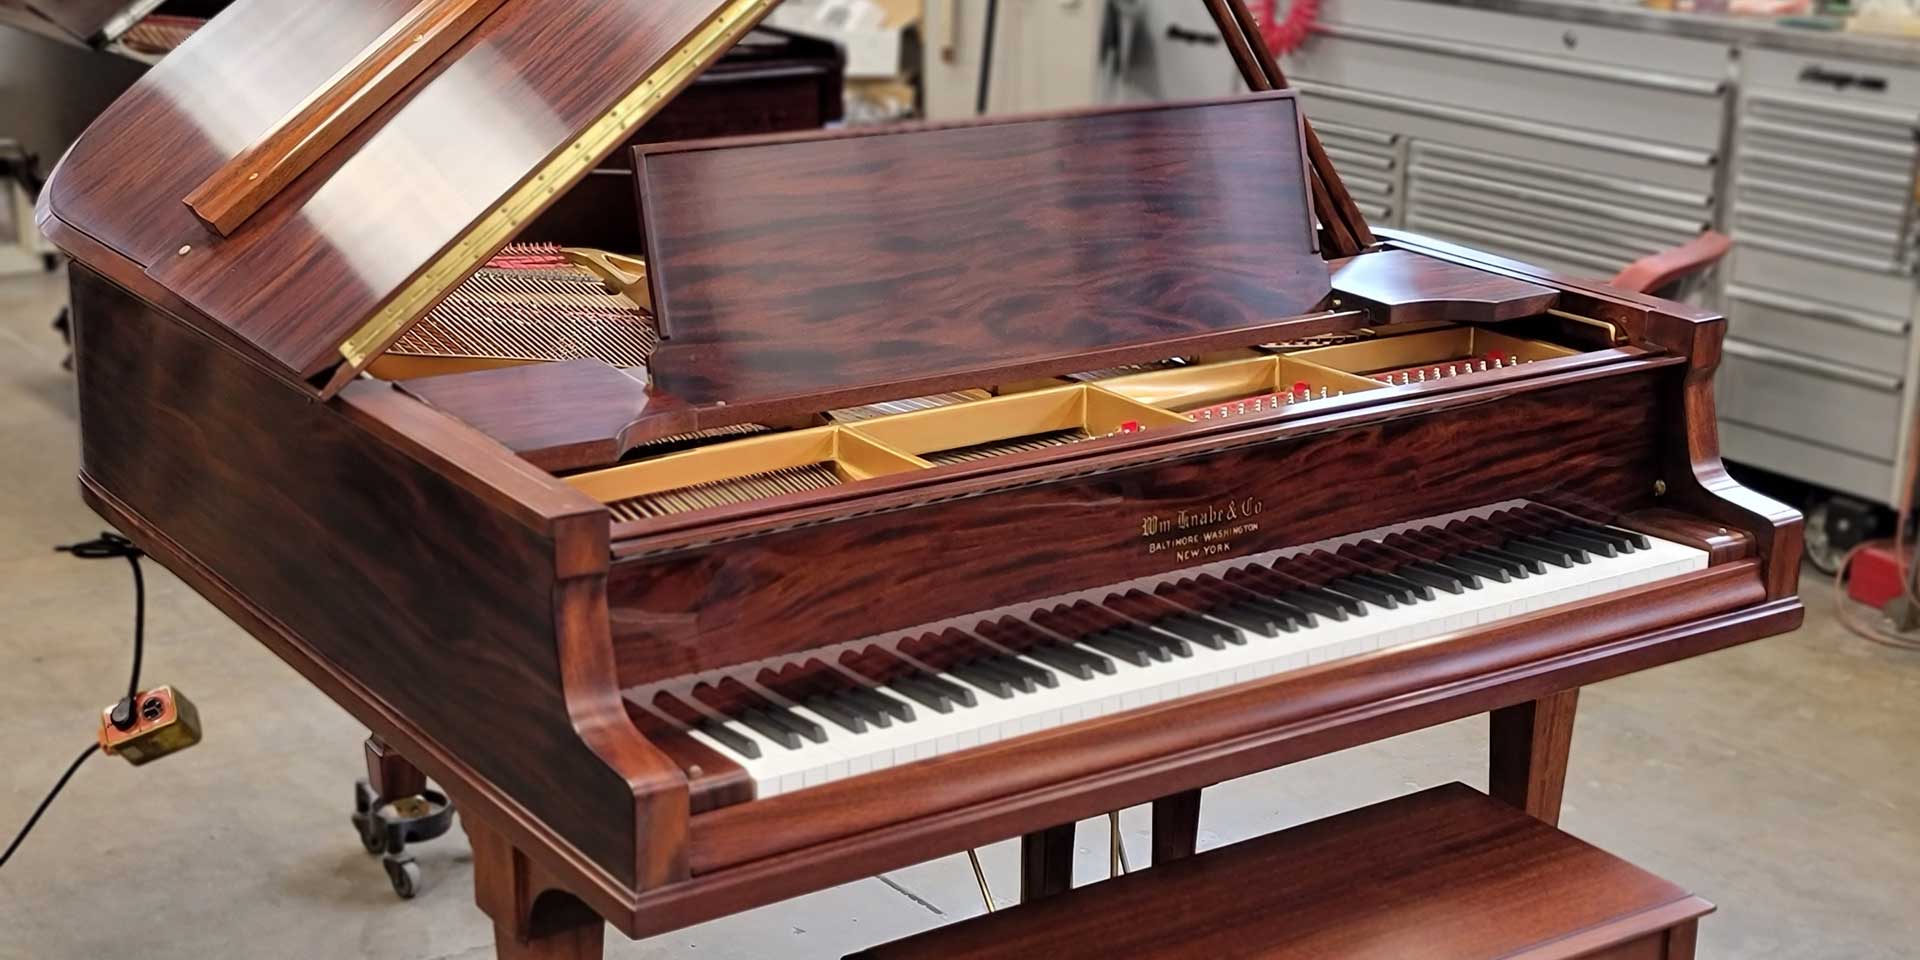 A 1924 Knabe Mahogany grand piano restored to as new after arriving battered and unplayable